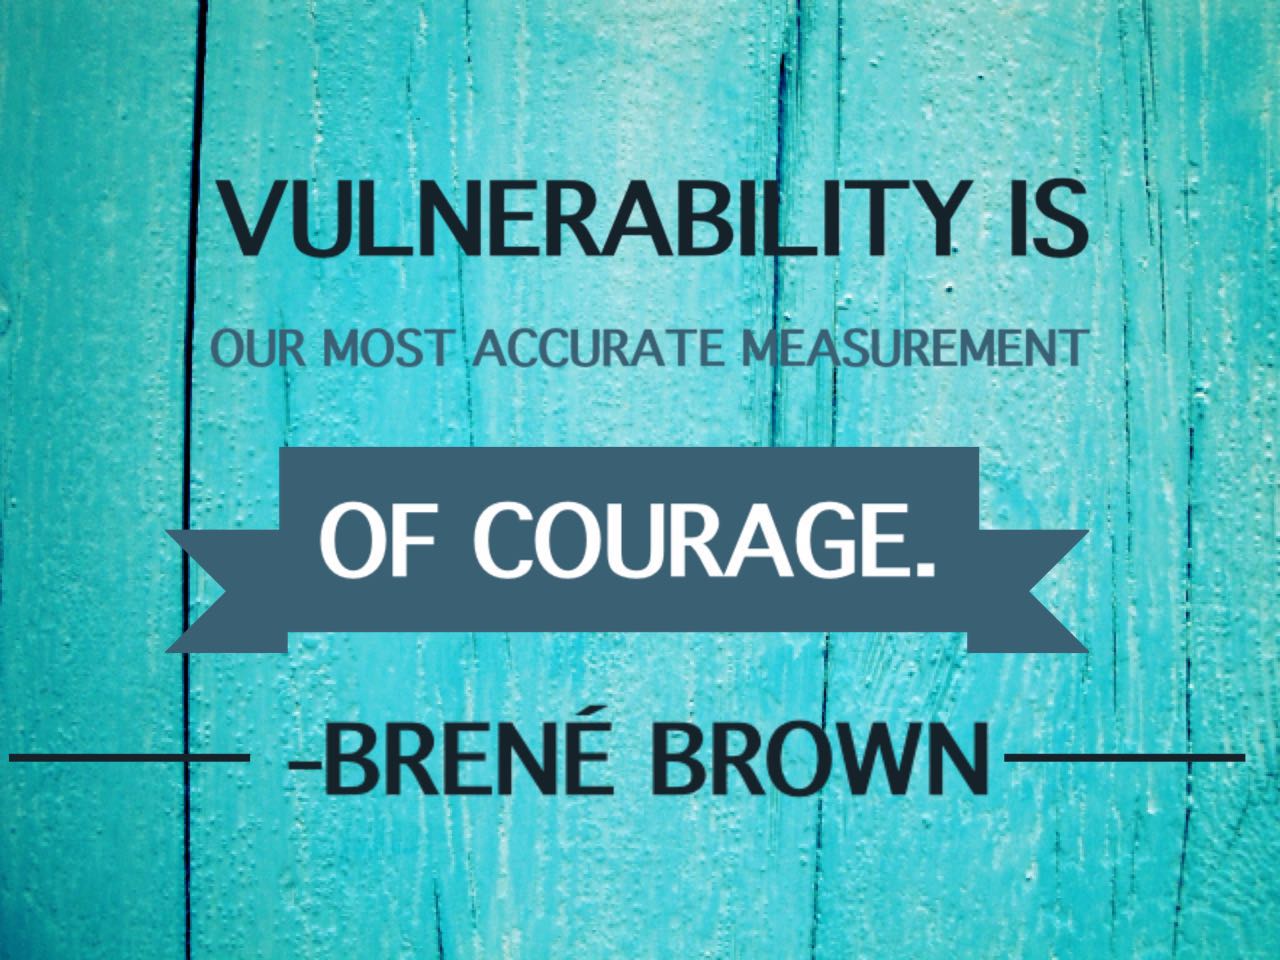 Being vulnerable may not be easy but it is definitely worth it.